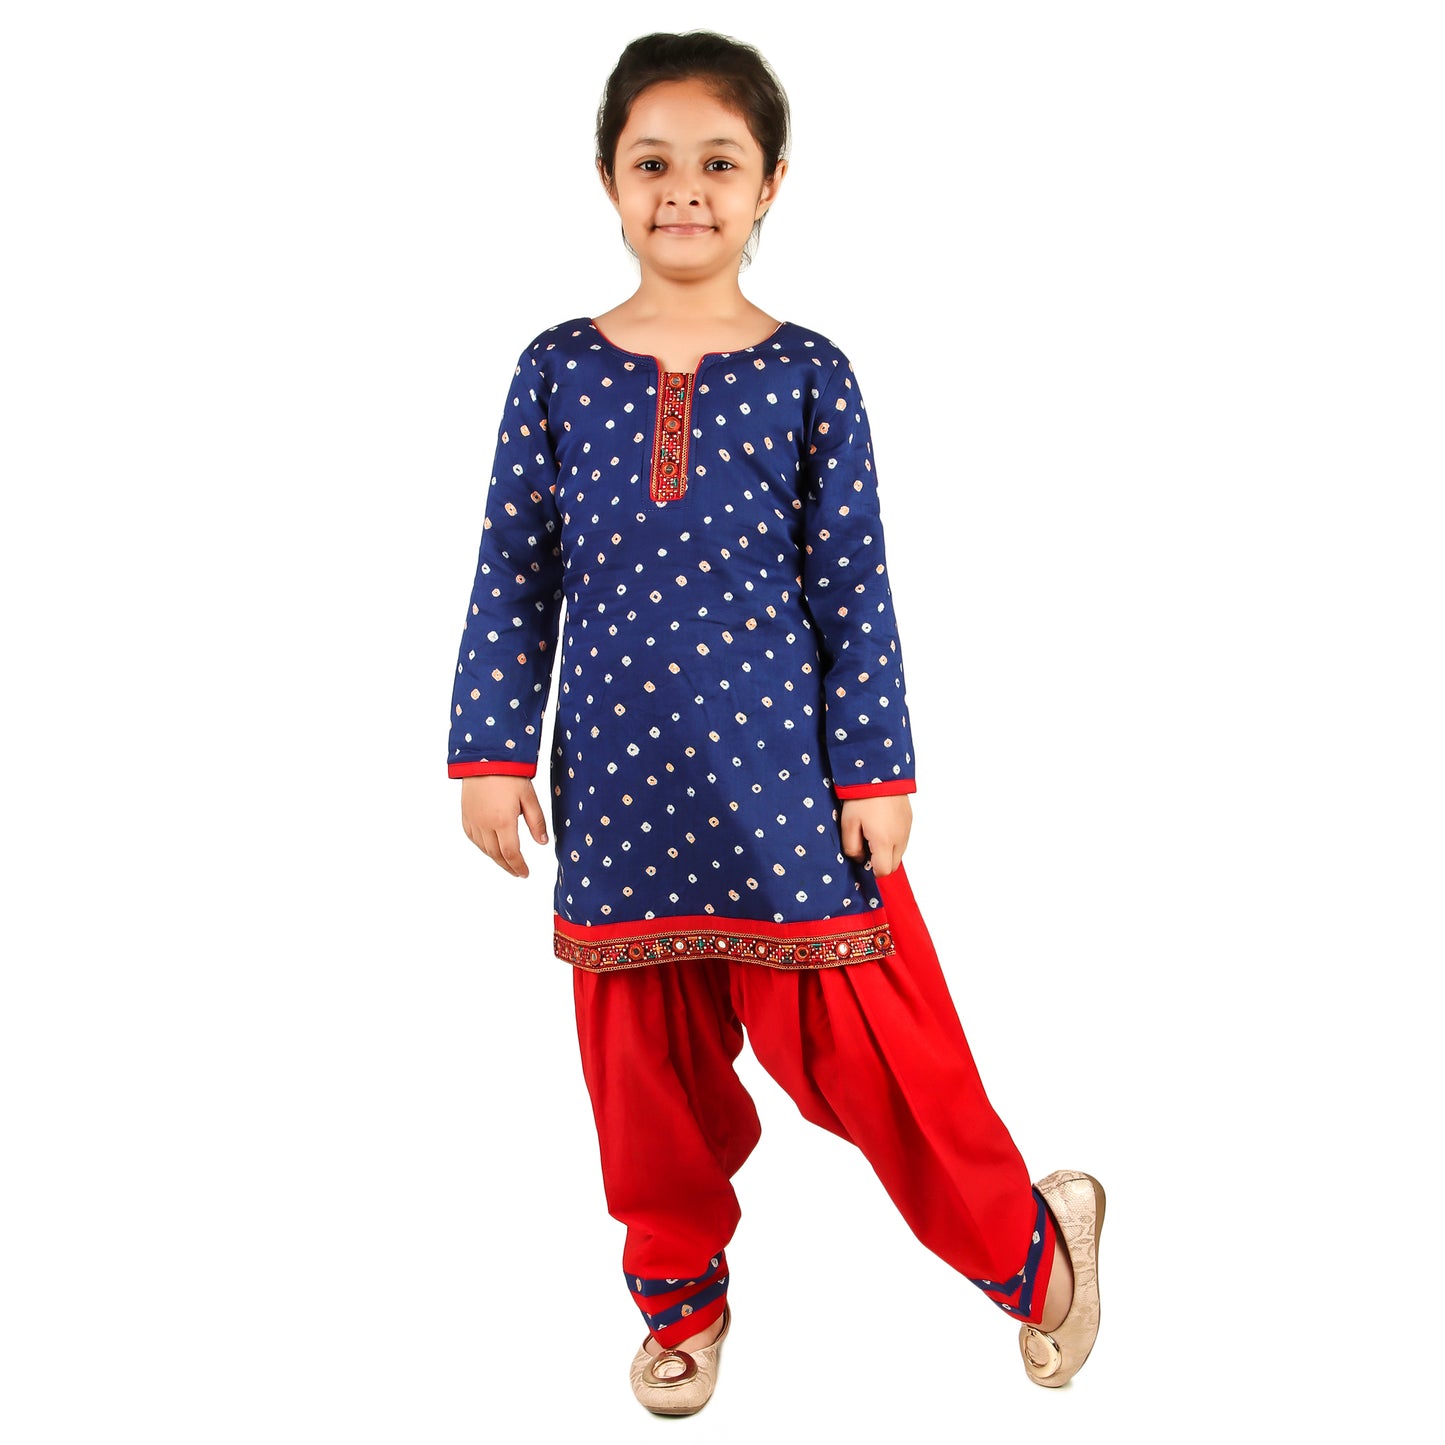 Blue Salwar Suit for Girls, Ages 6 Months to 16 Years, Cotton, Bandhani